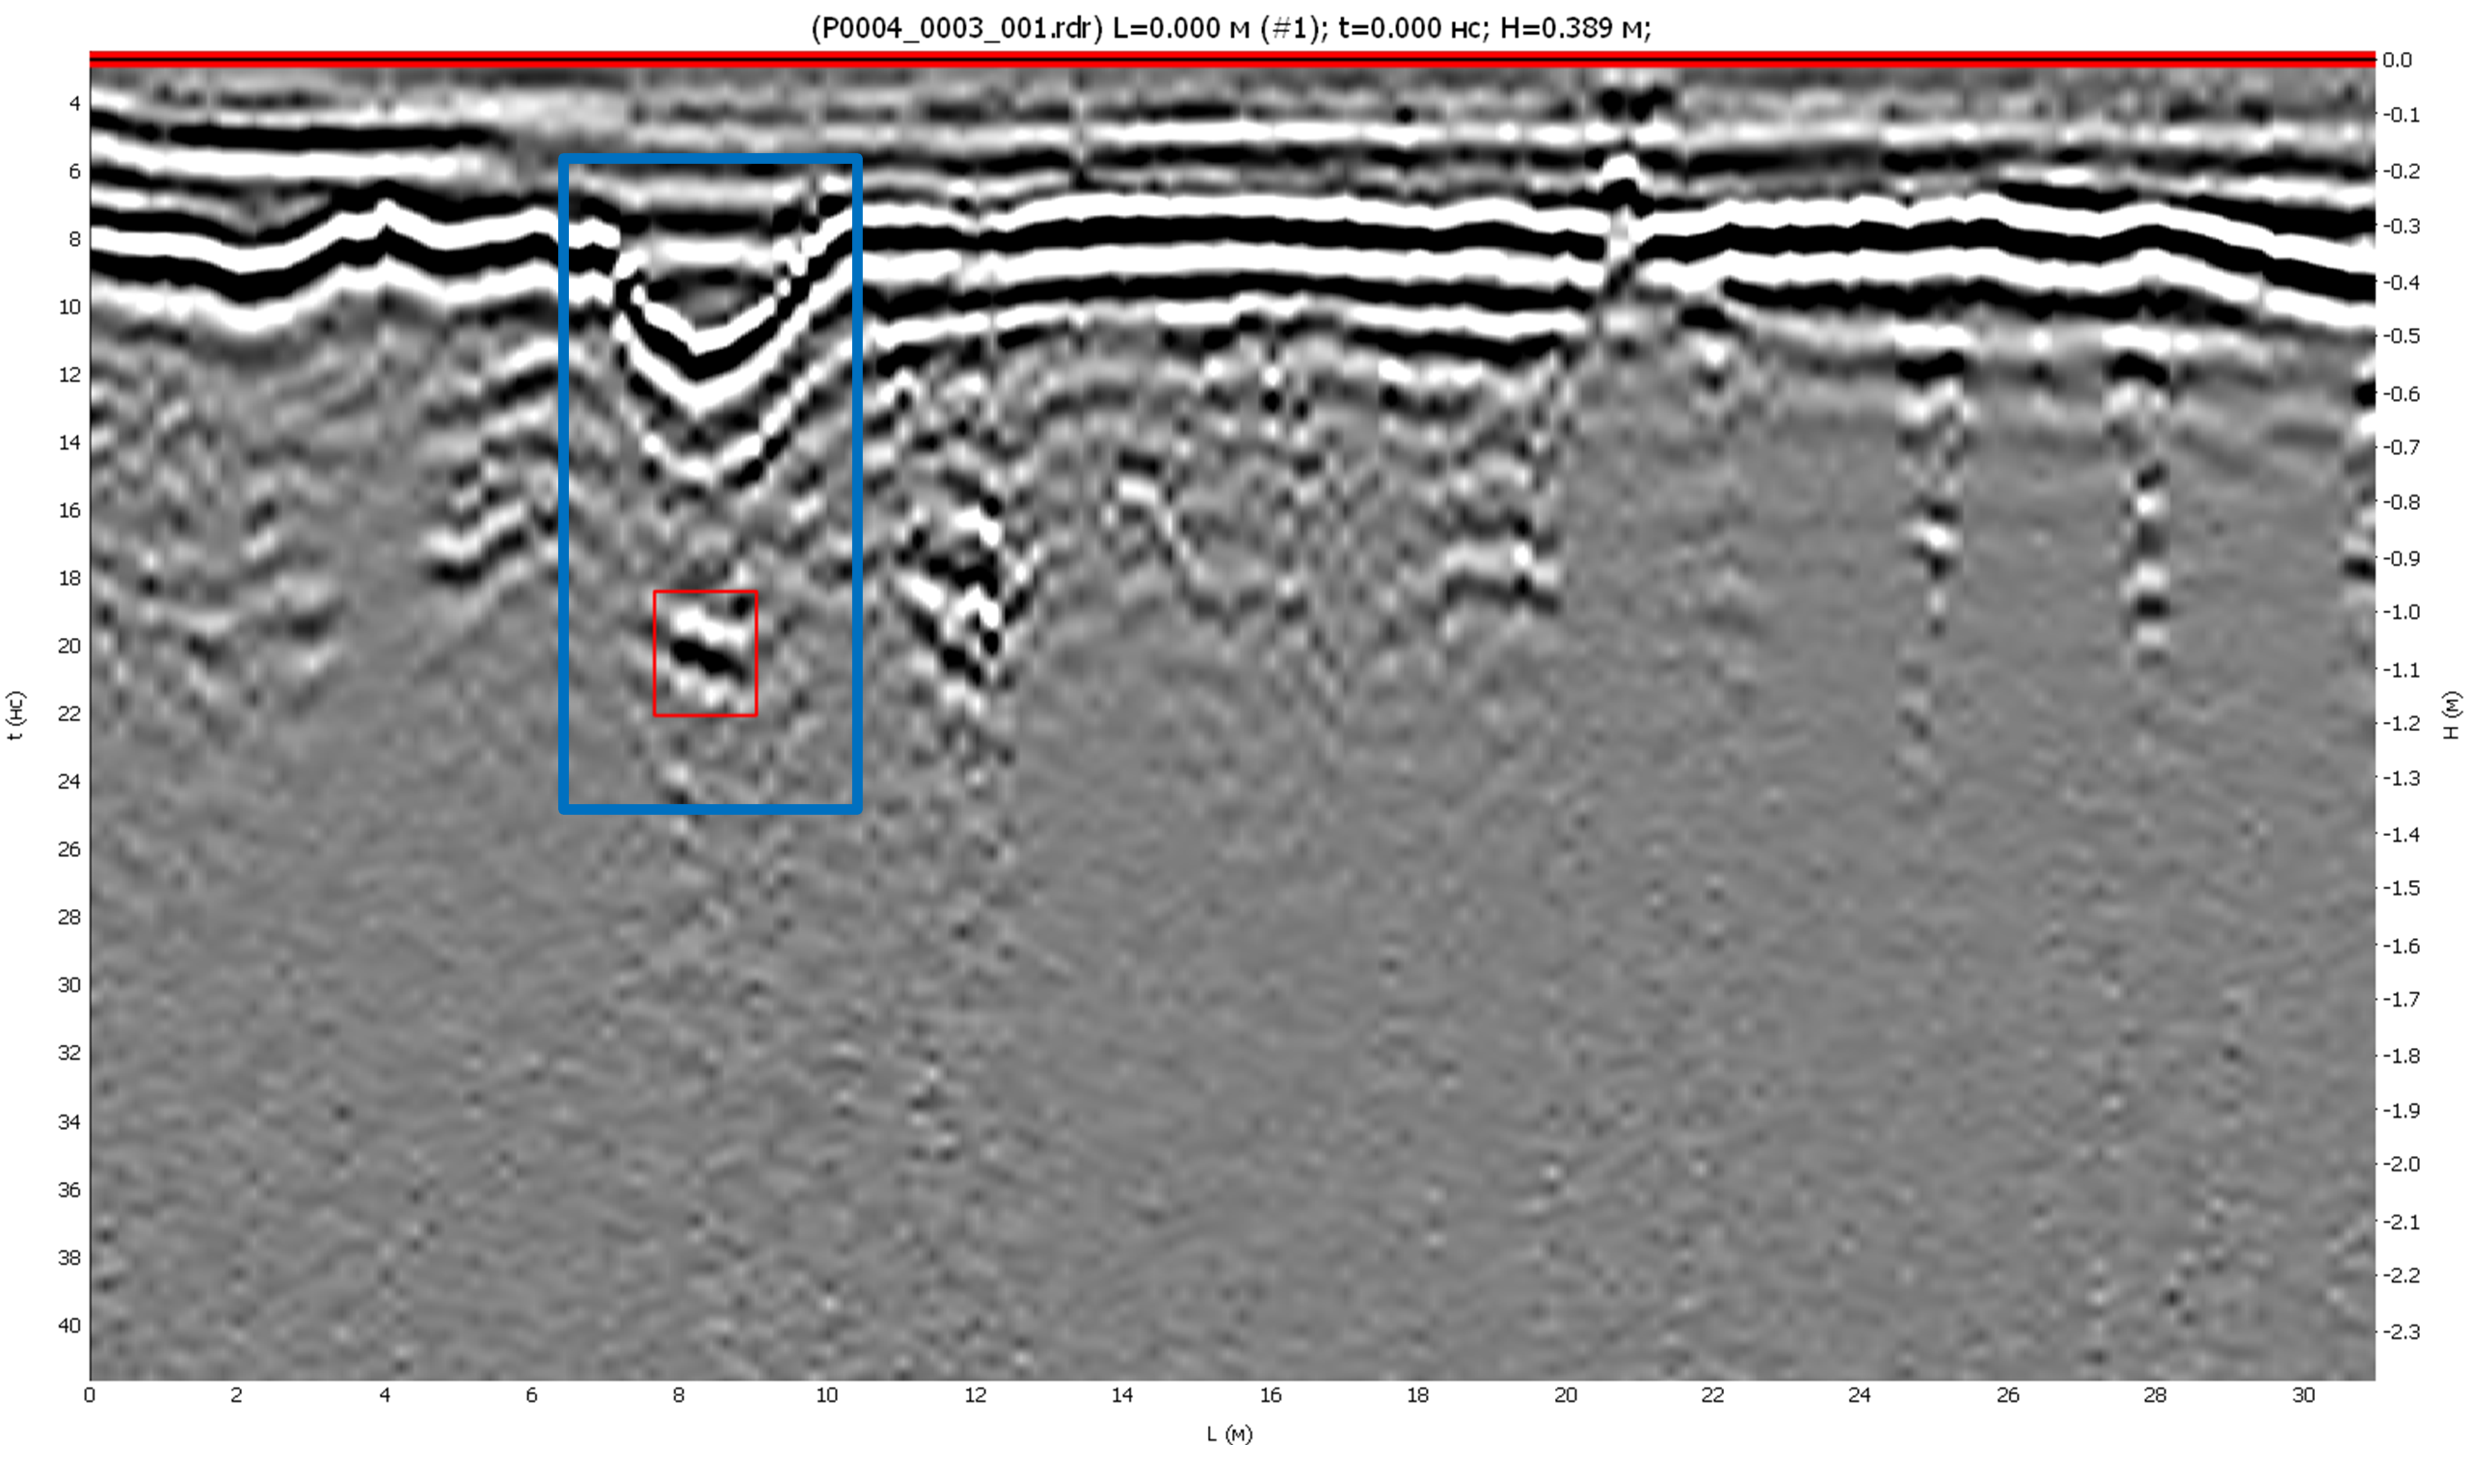 GPR profile 700 MHz with prerequisites for the failure of the road surface